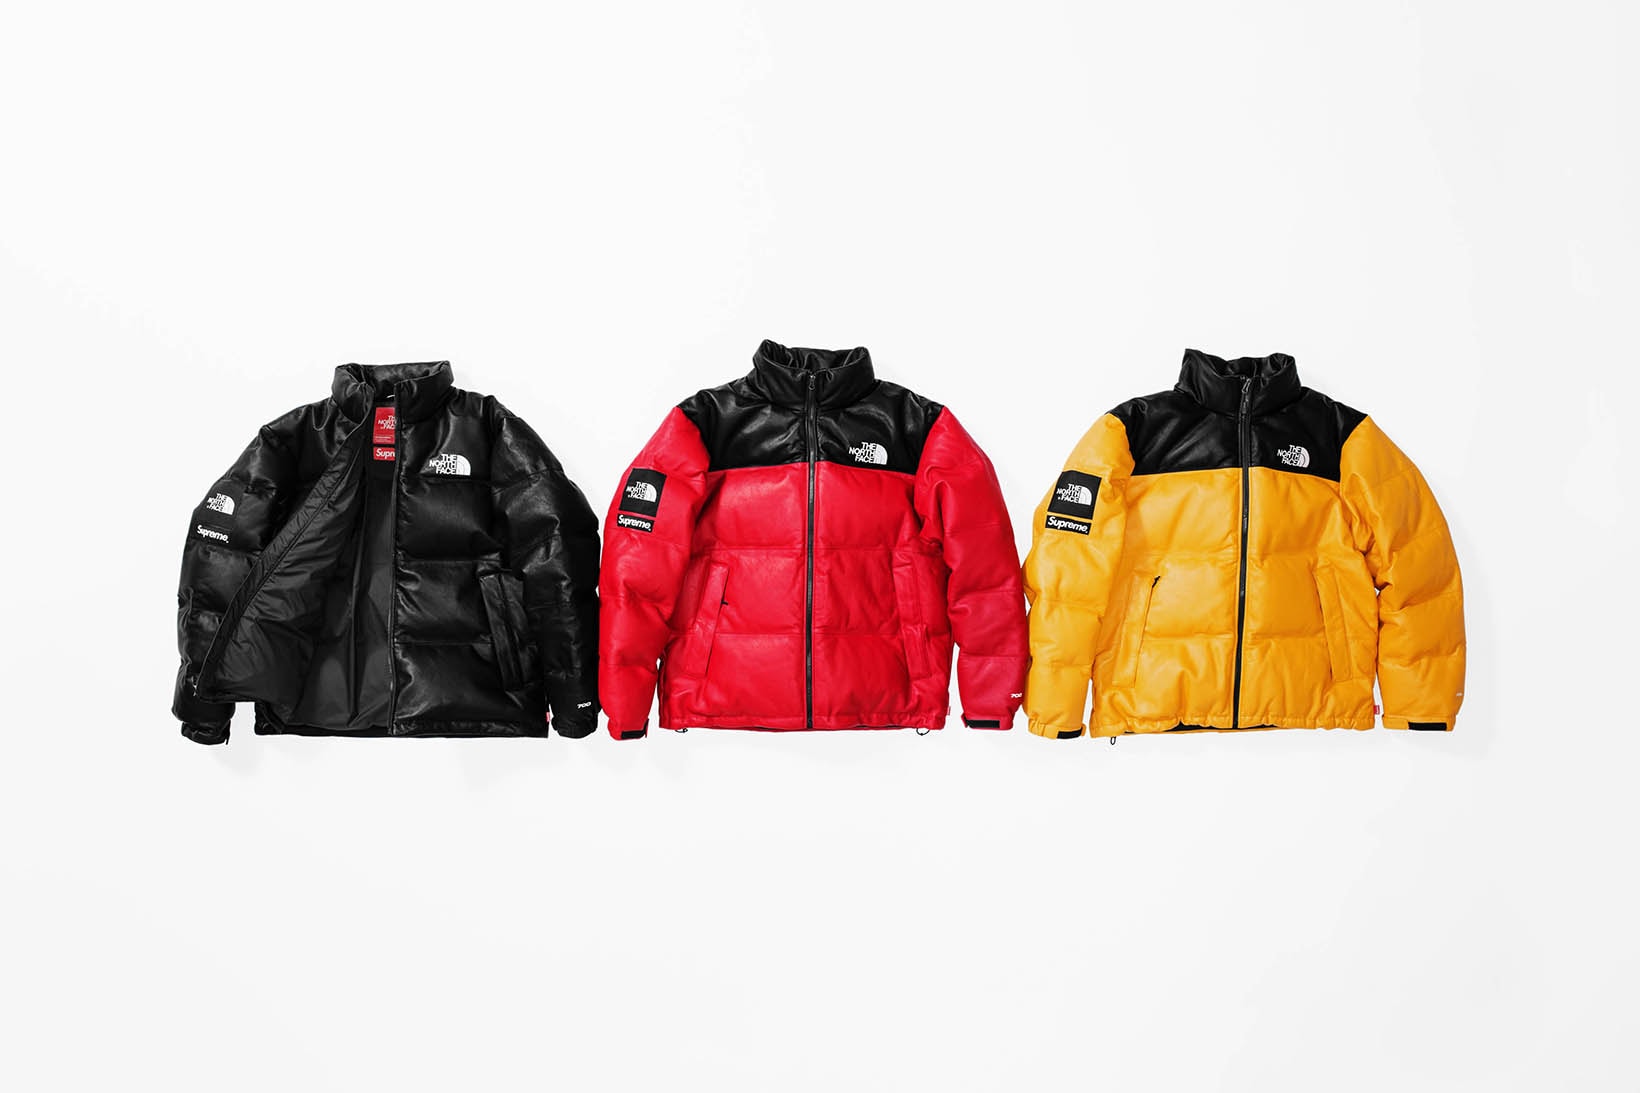 Supreme x The North Face 2017 Fall Group Jacket